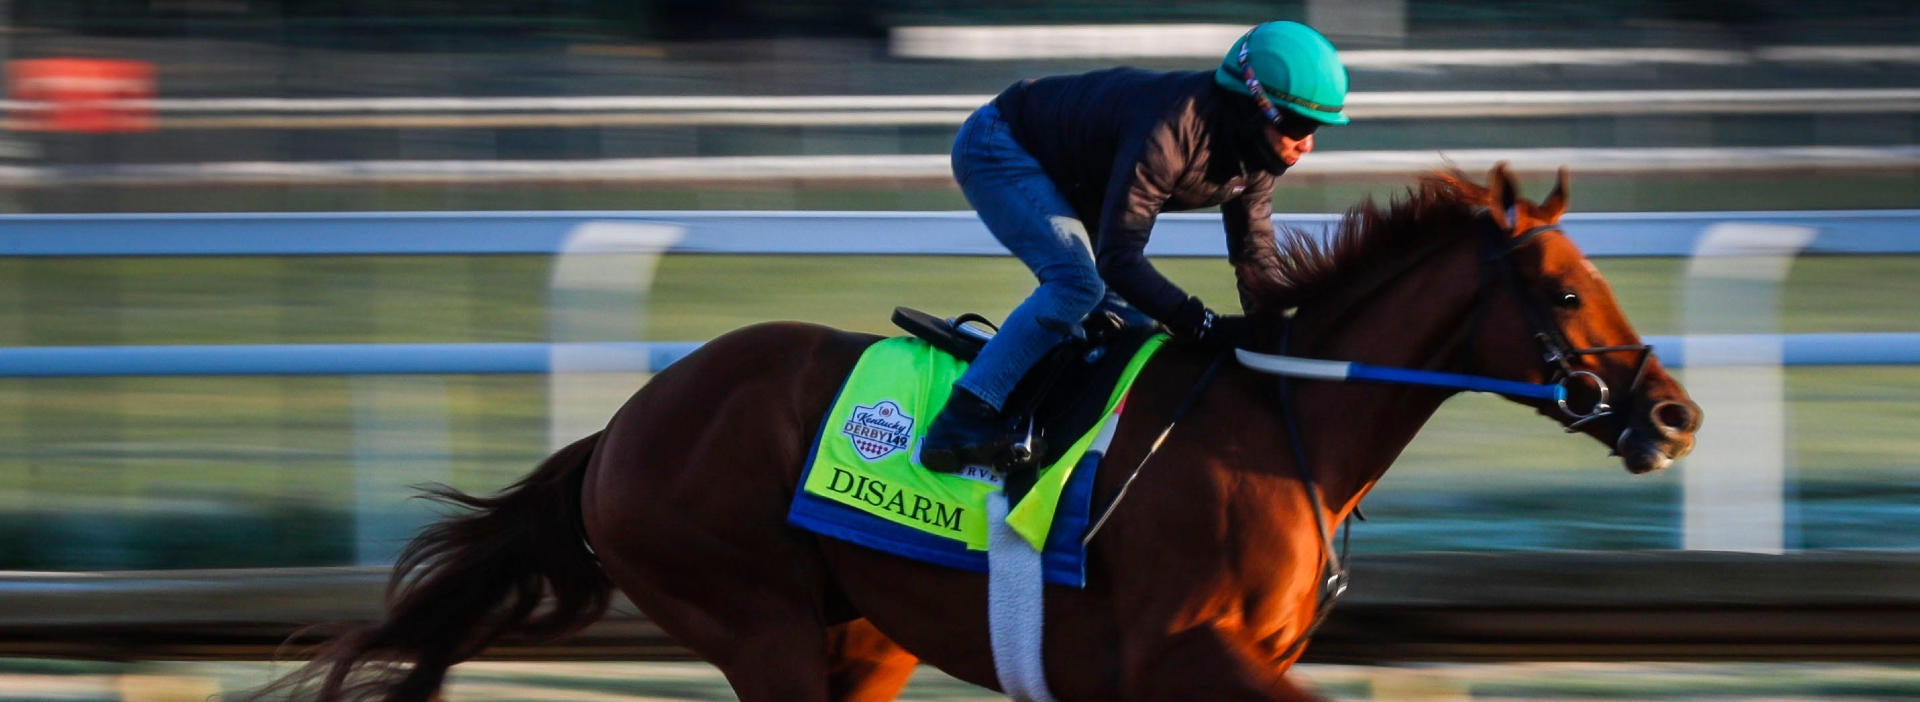 Disarm profile 2023 Kentucky Derby odds, post position, history and